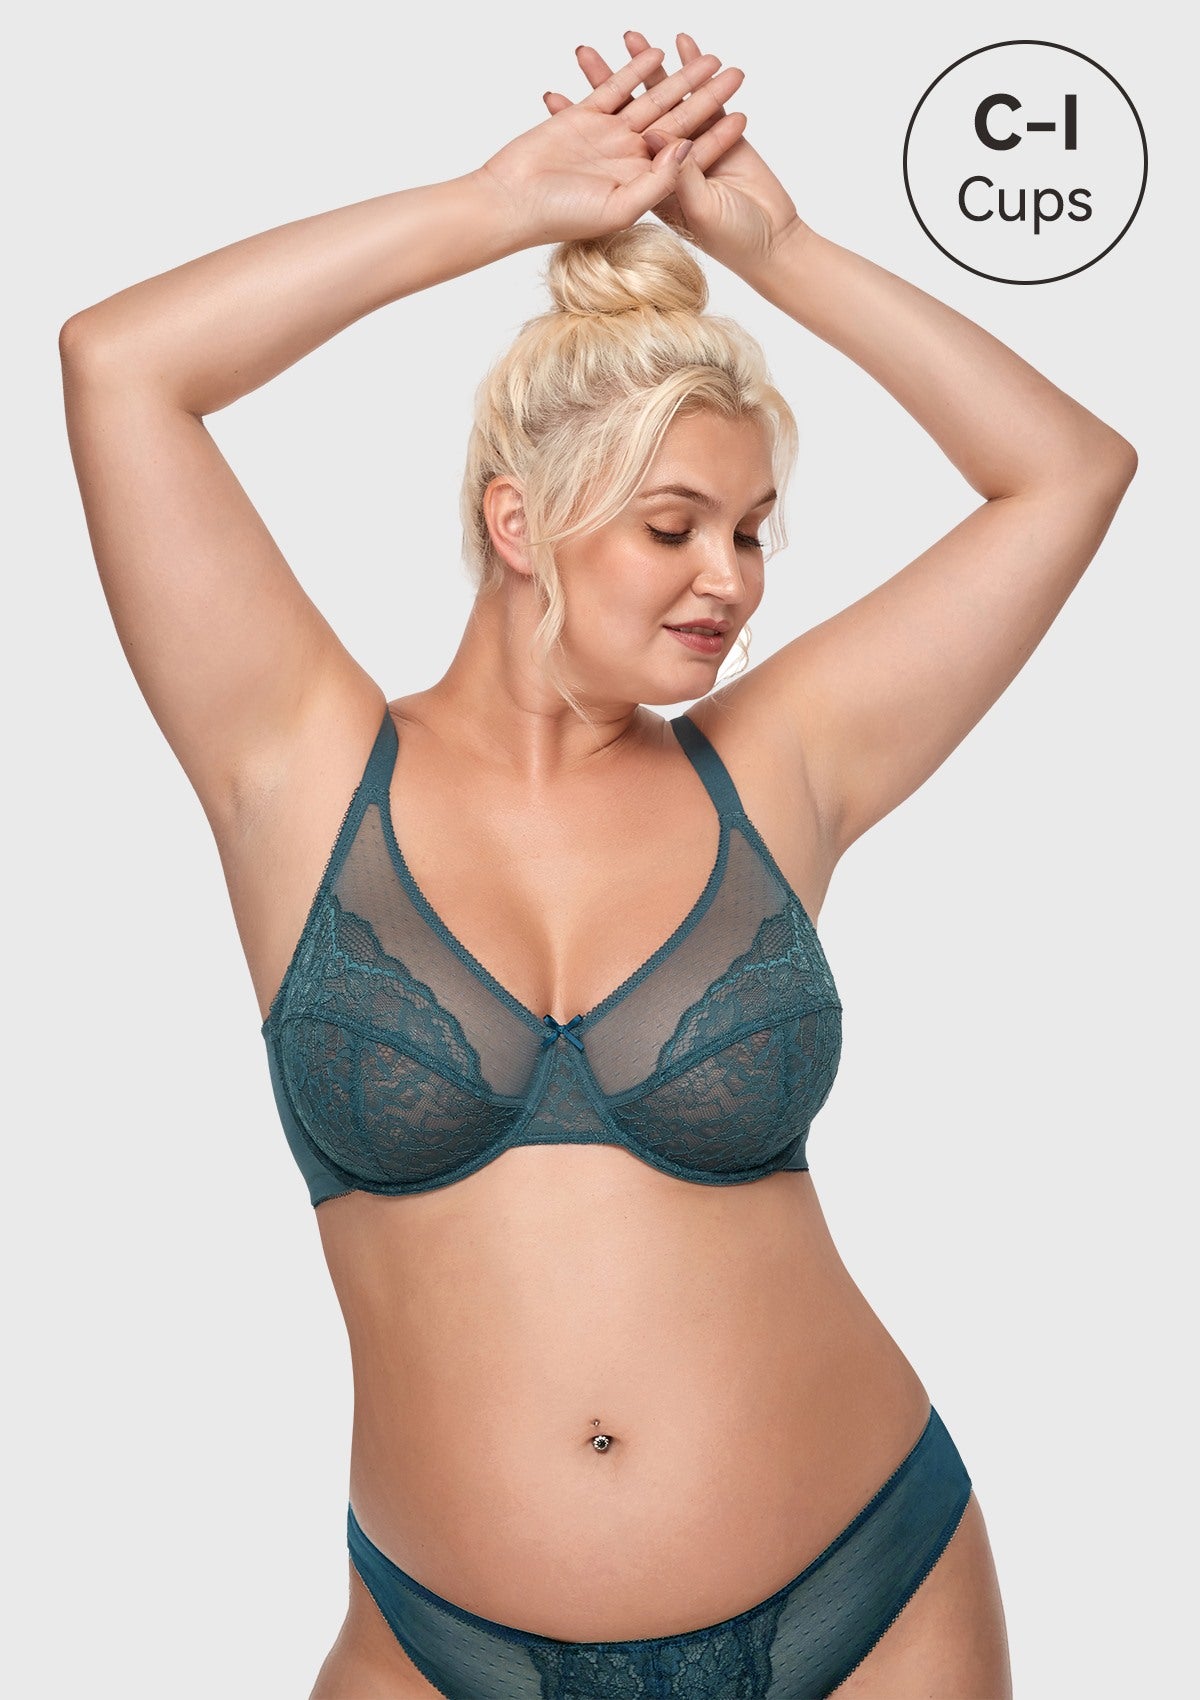 HSIA Enchante Full Coverage Bra: Supportive Bra For Big Busts - Balsam Blue / 42 / D